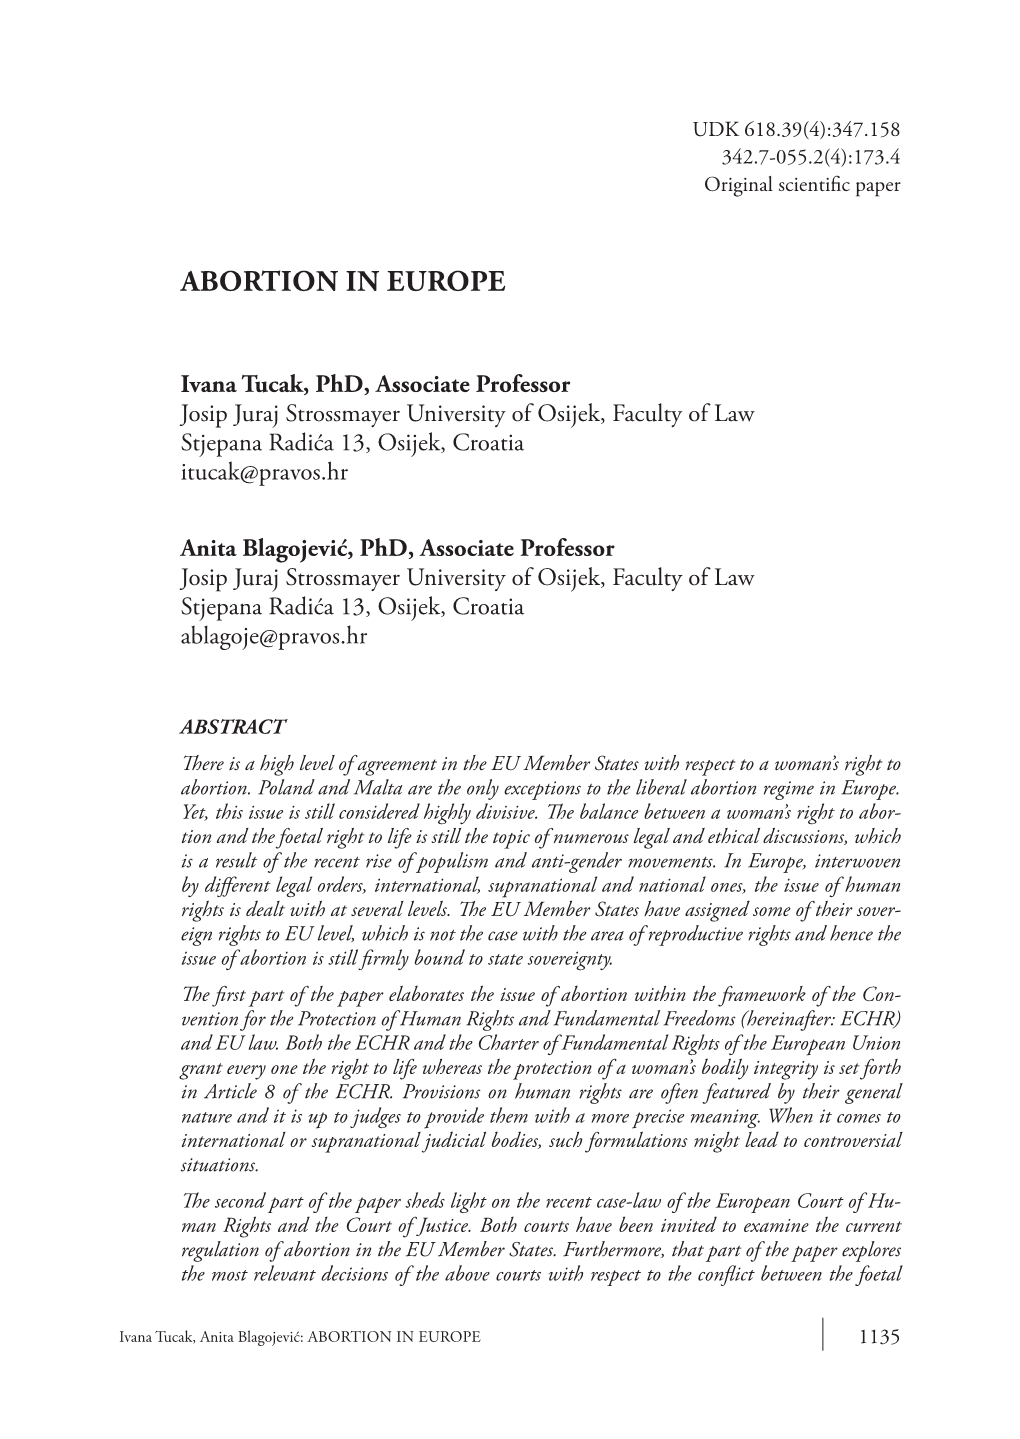 Abortion in Europe